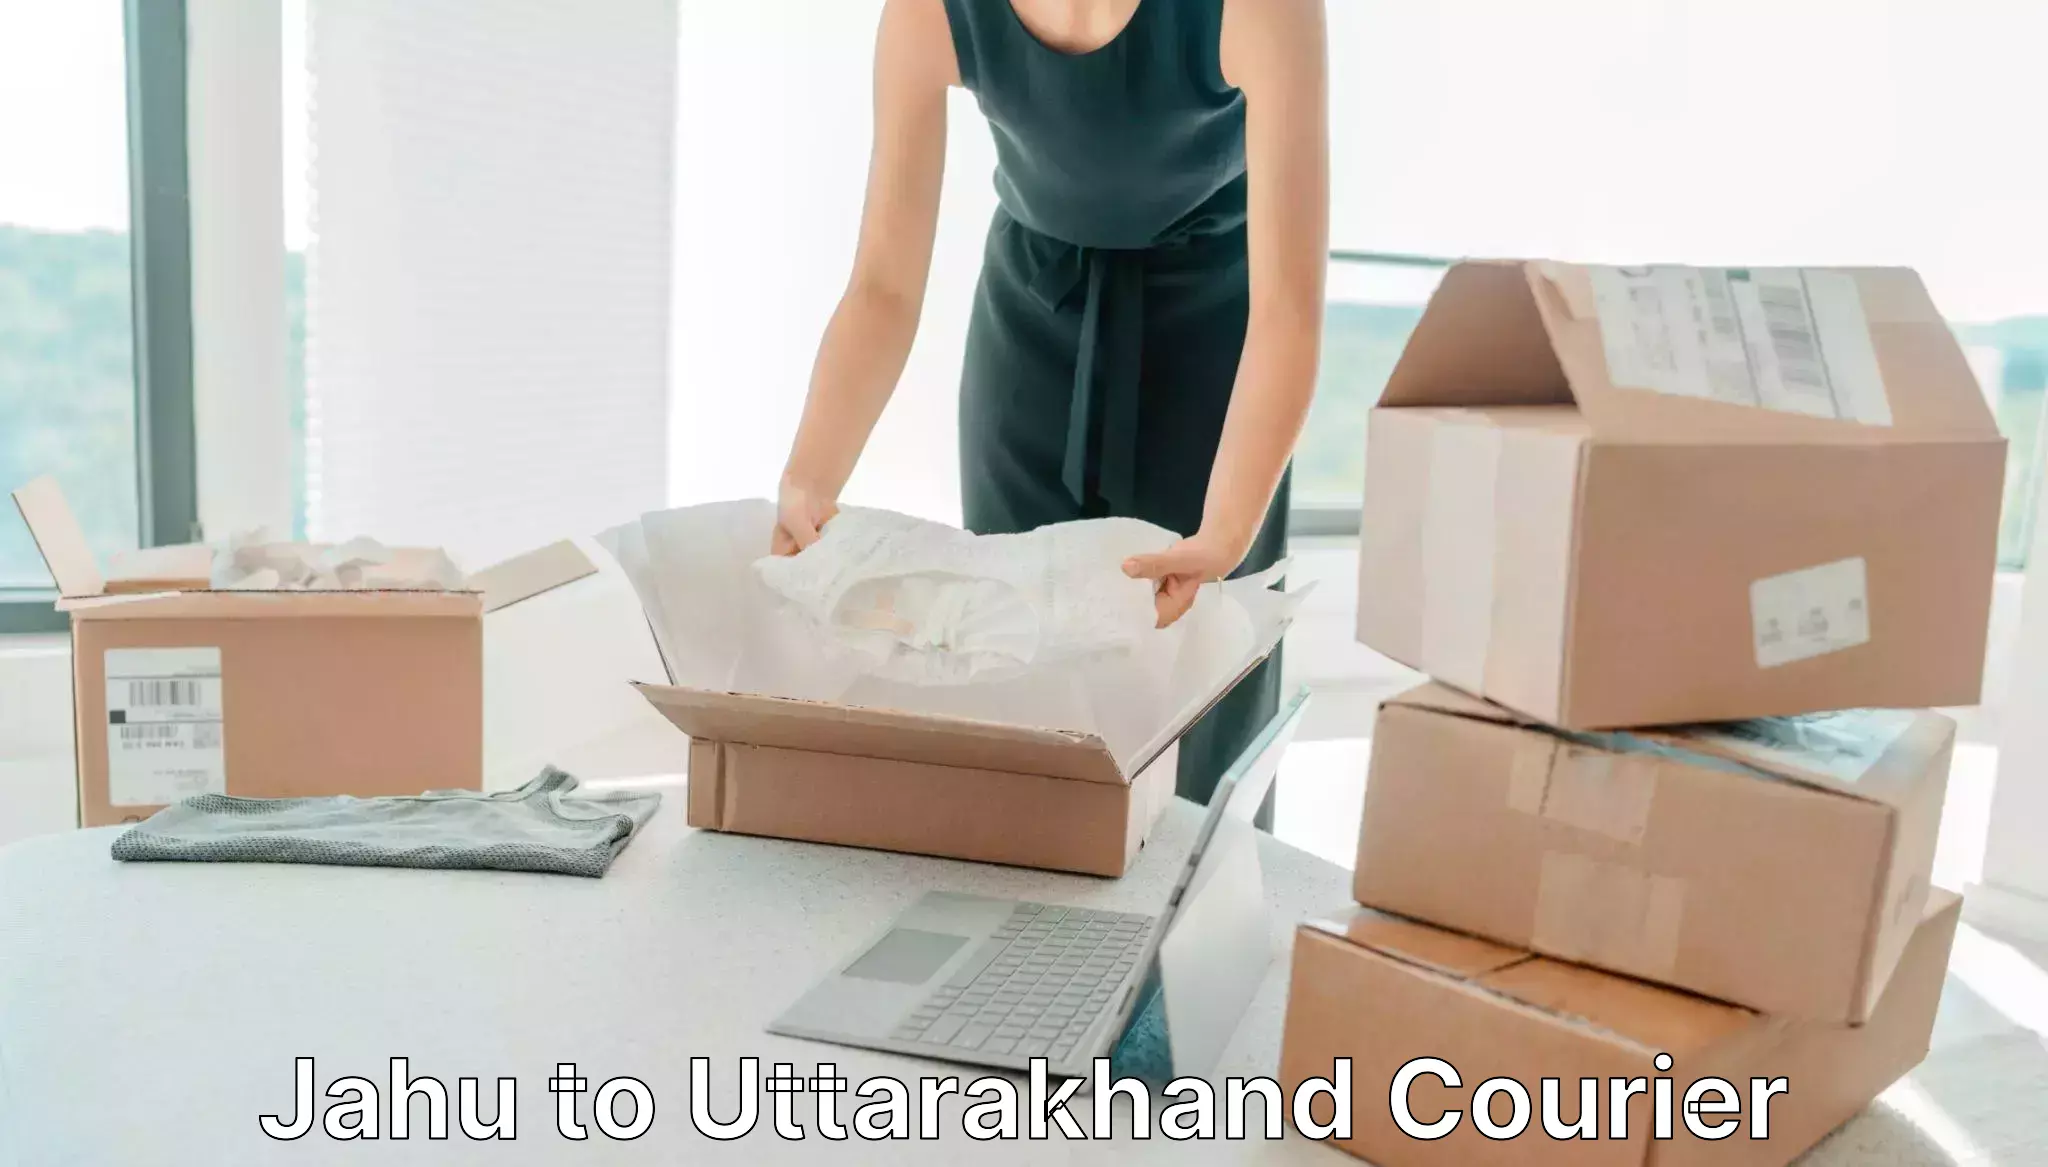 Professional courier handling Jahu to Haridwar